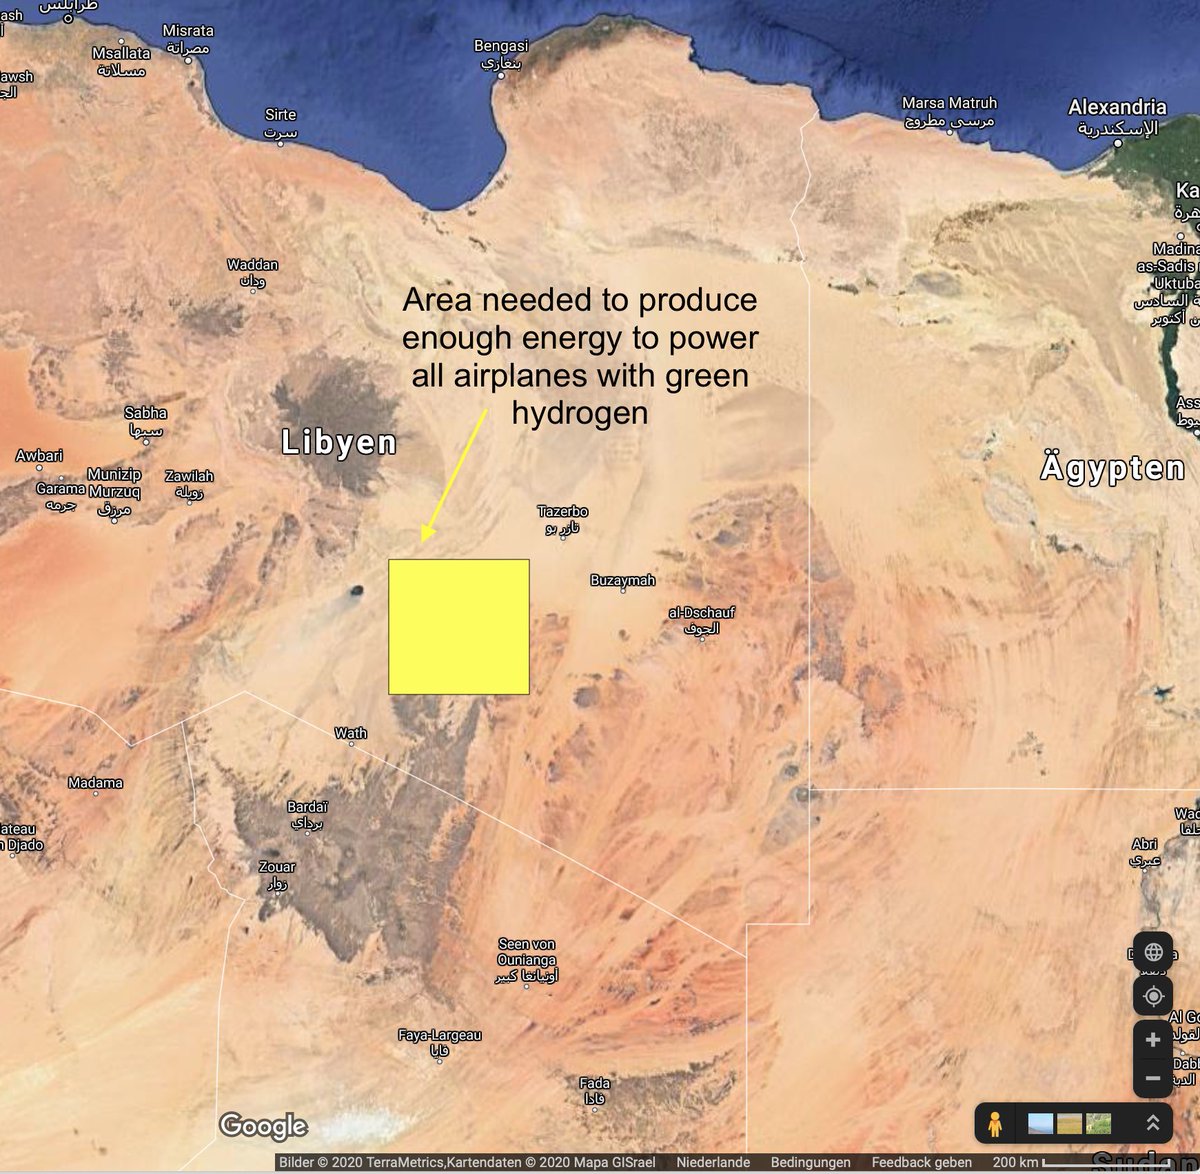 To generate 3.36e12 kWh, we would then need an area that is 240 x 240 km^2 large. It might look like this on Google maps... (perhaps a sustainable business model for the Maghreb countries?) 7/